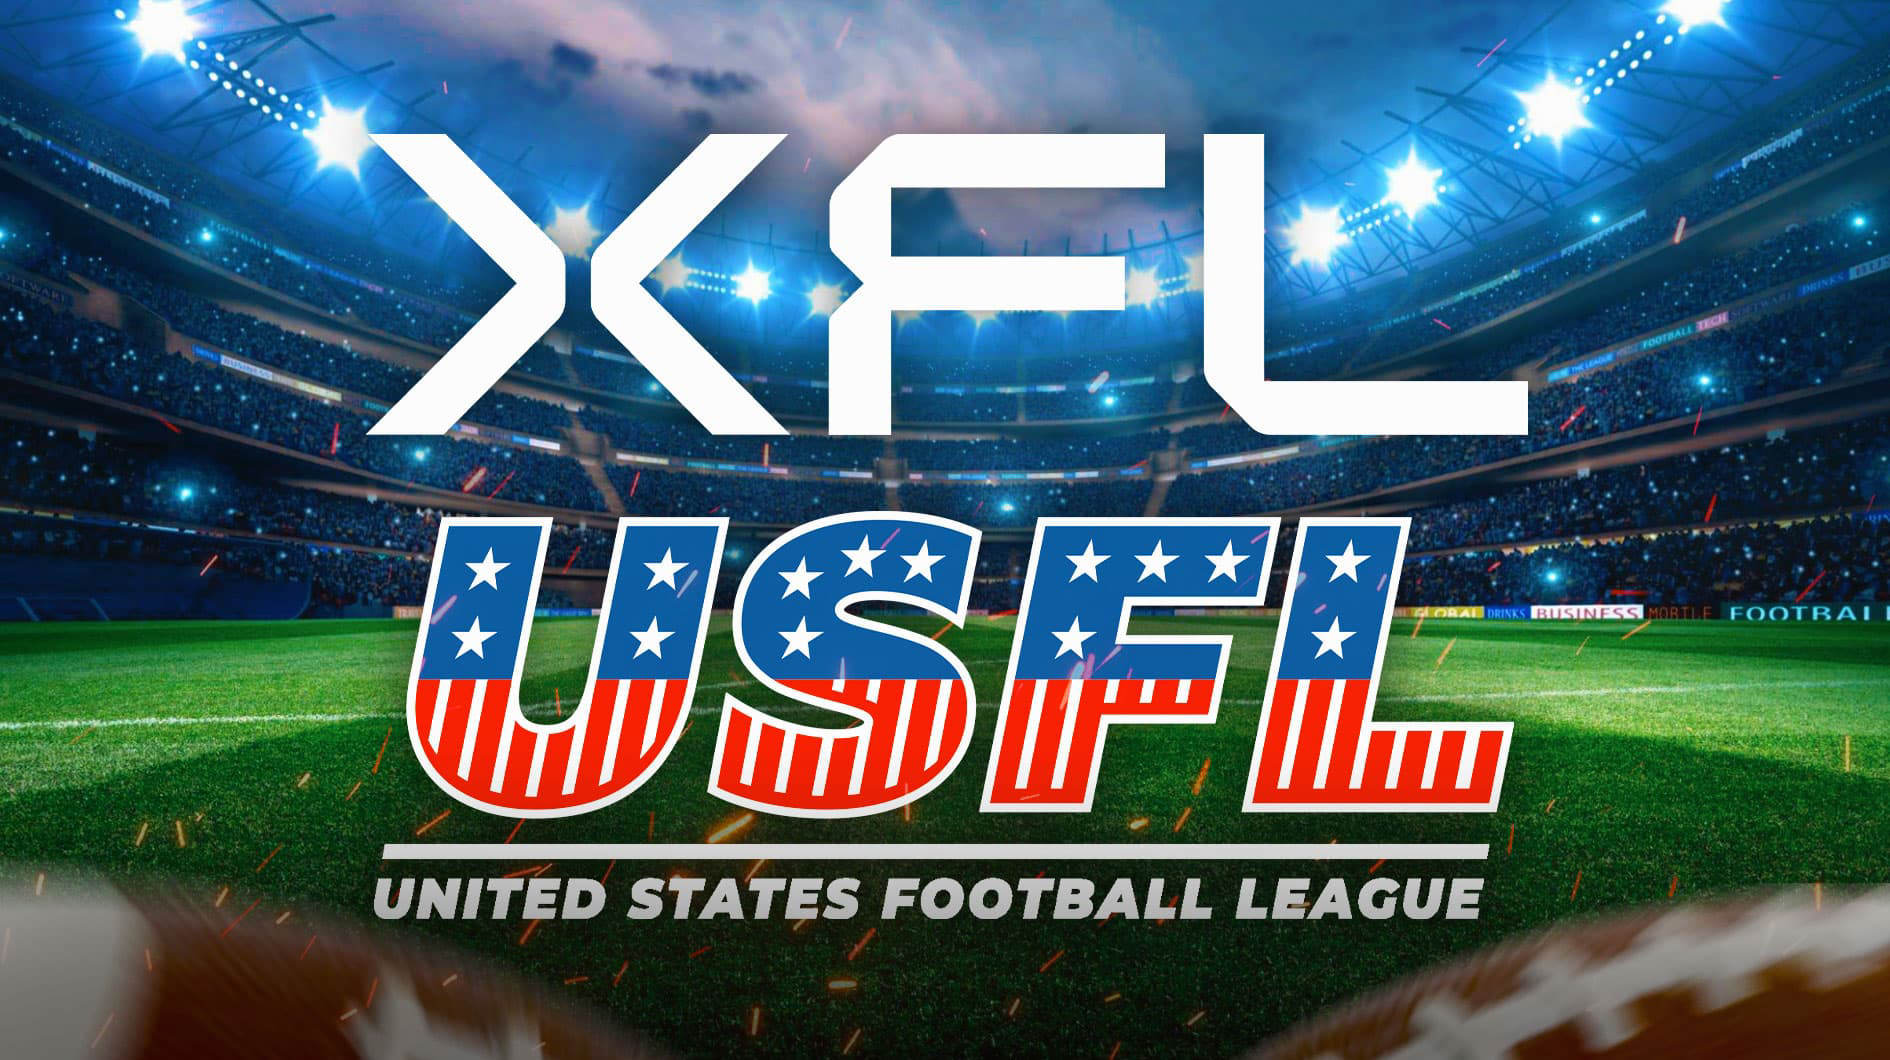 XFLUSFL merger finalized, eight teams playing in inaugural season revealed